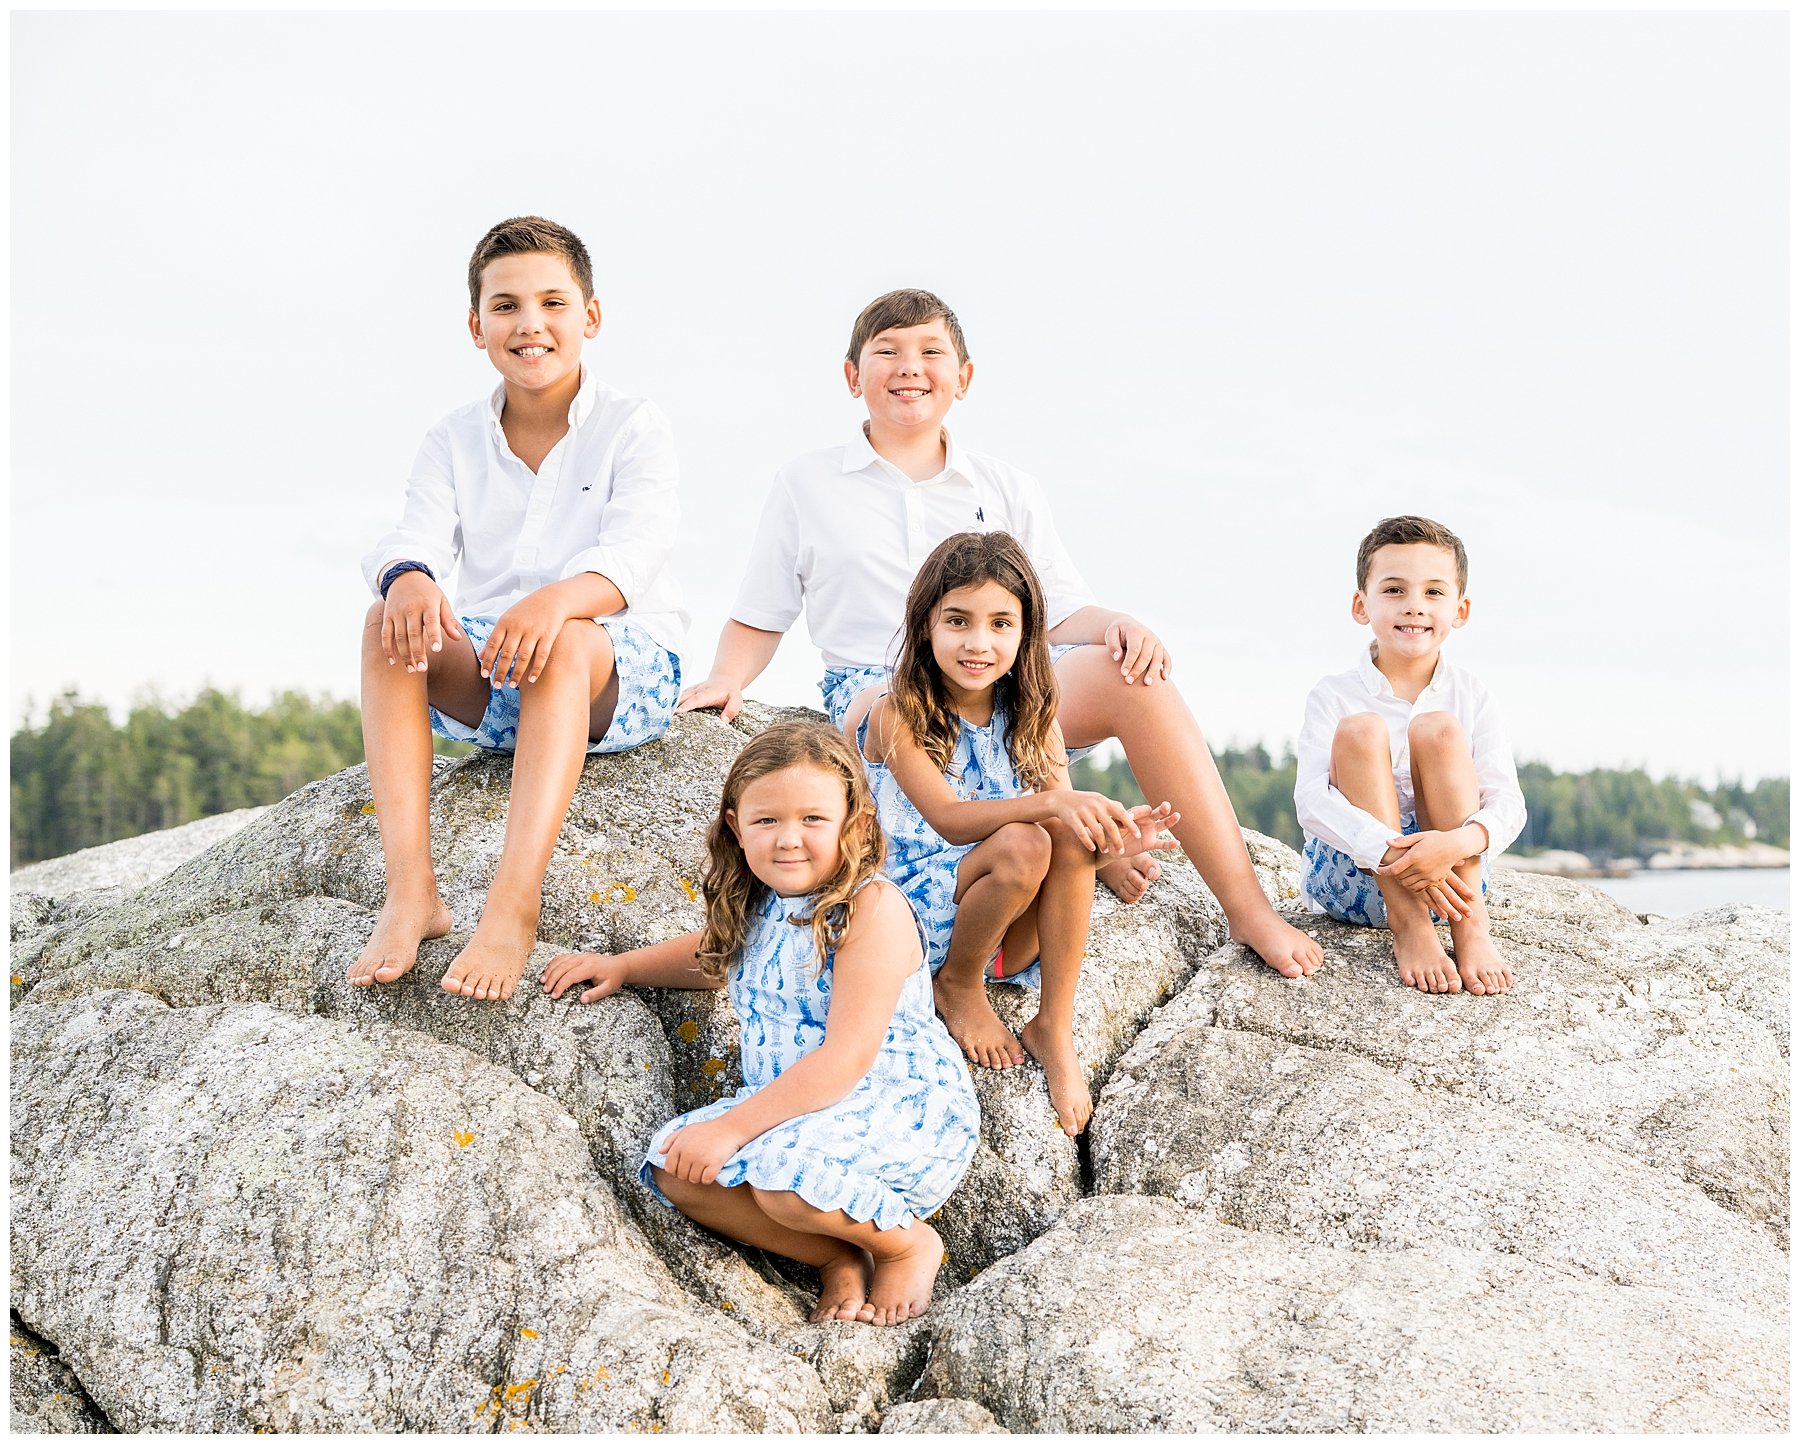 Boothbay Harbor Family Photographer, Southport Island Maine Family Photographer, Two Adventurous Souls- 082322_0004.jpg